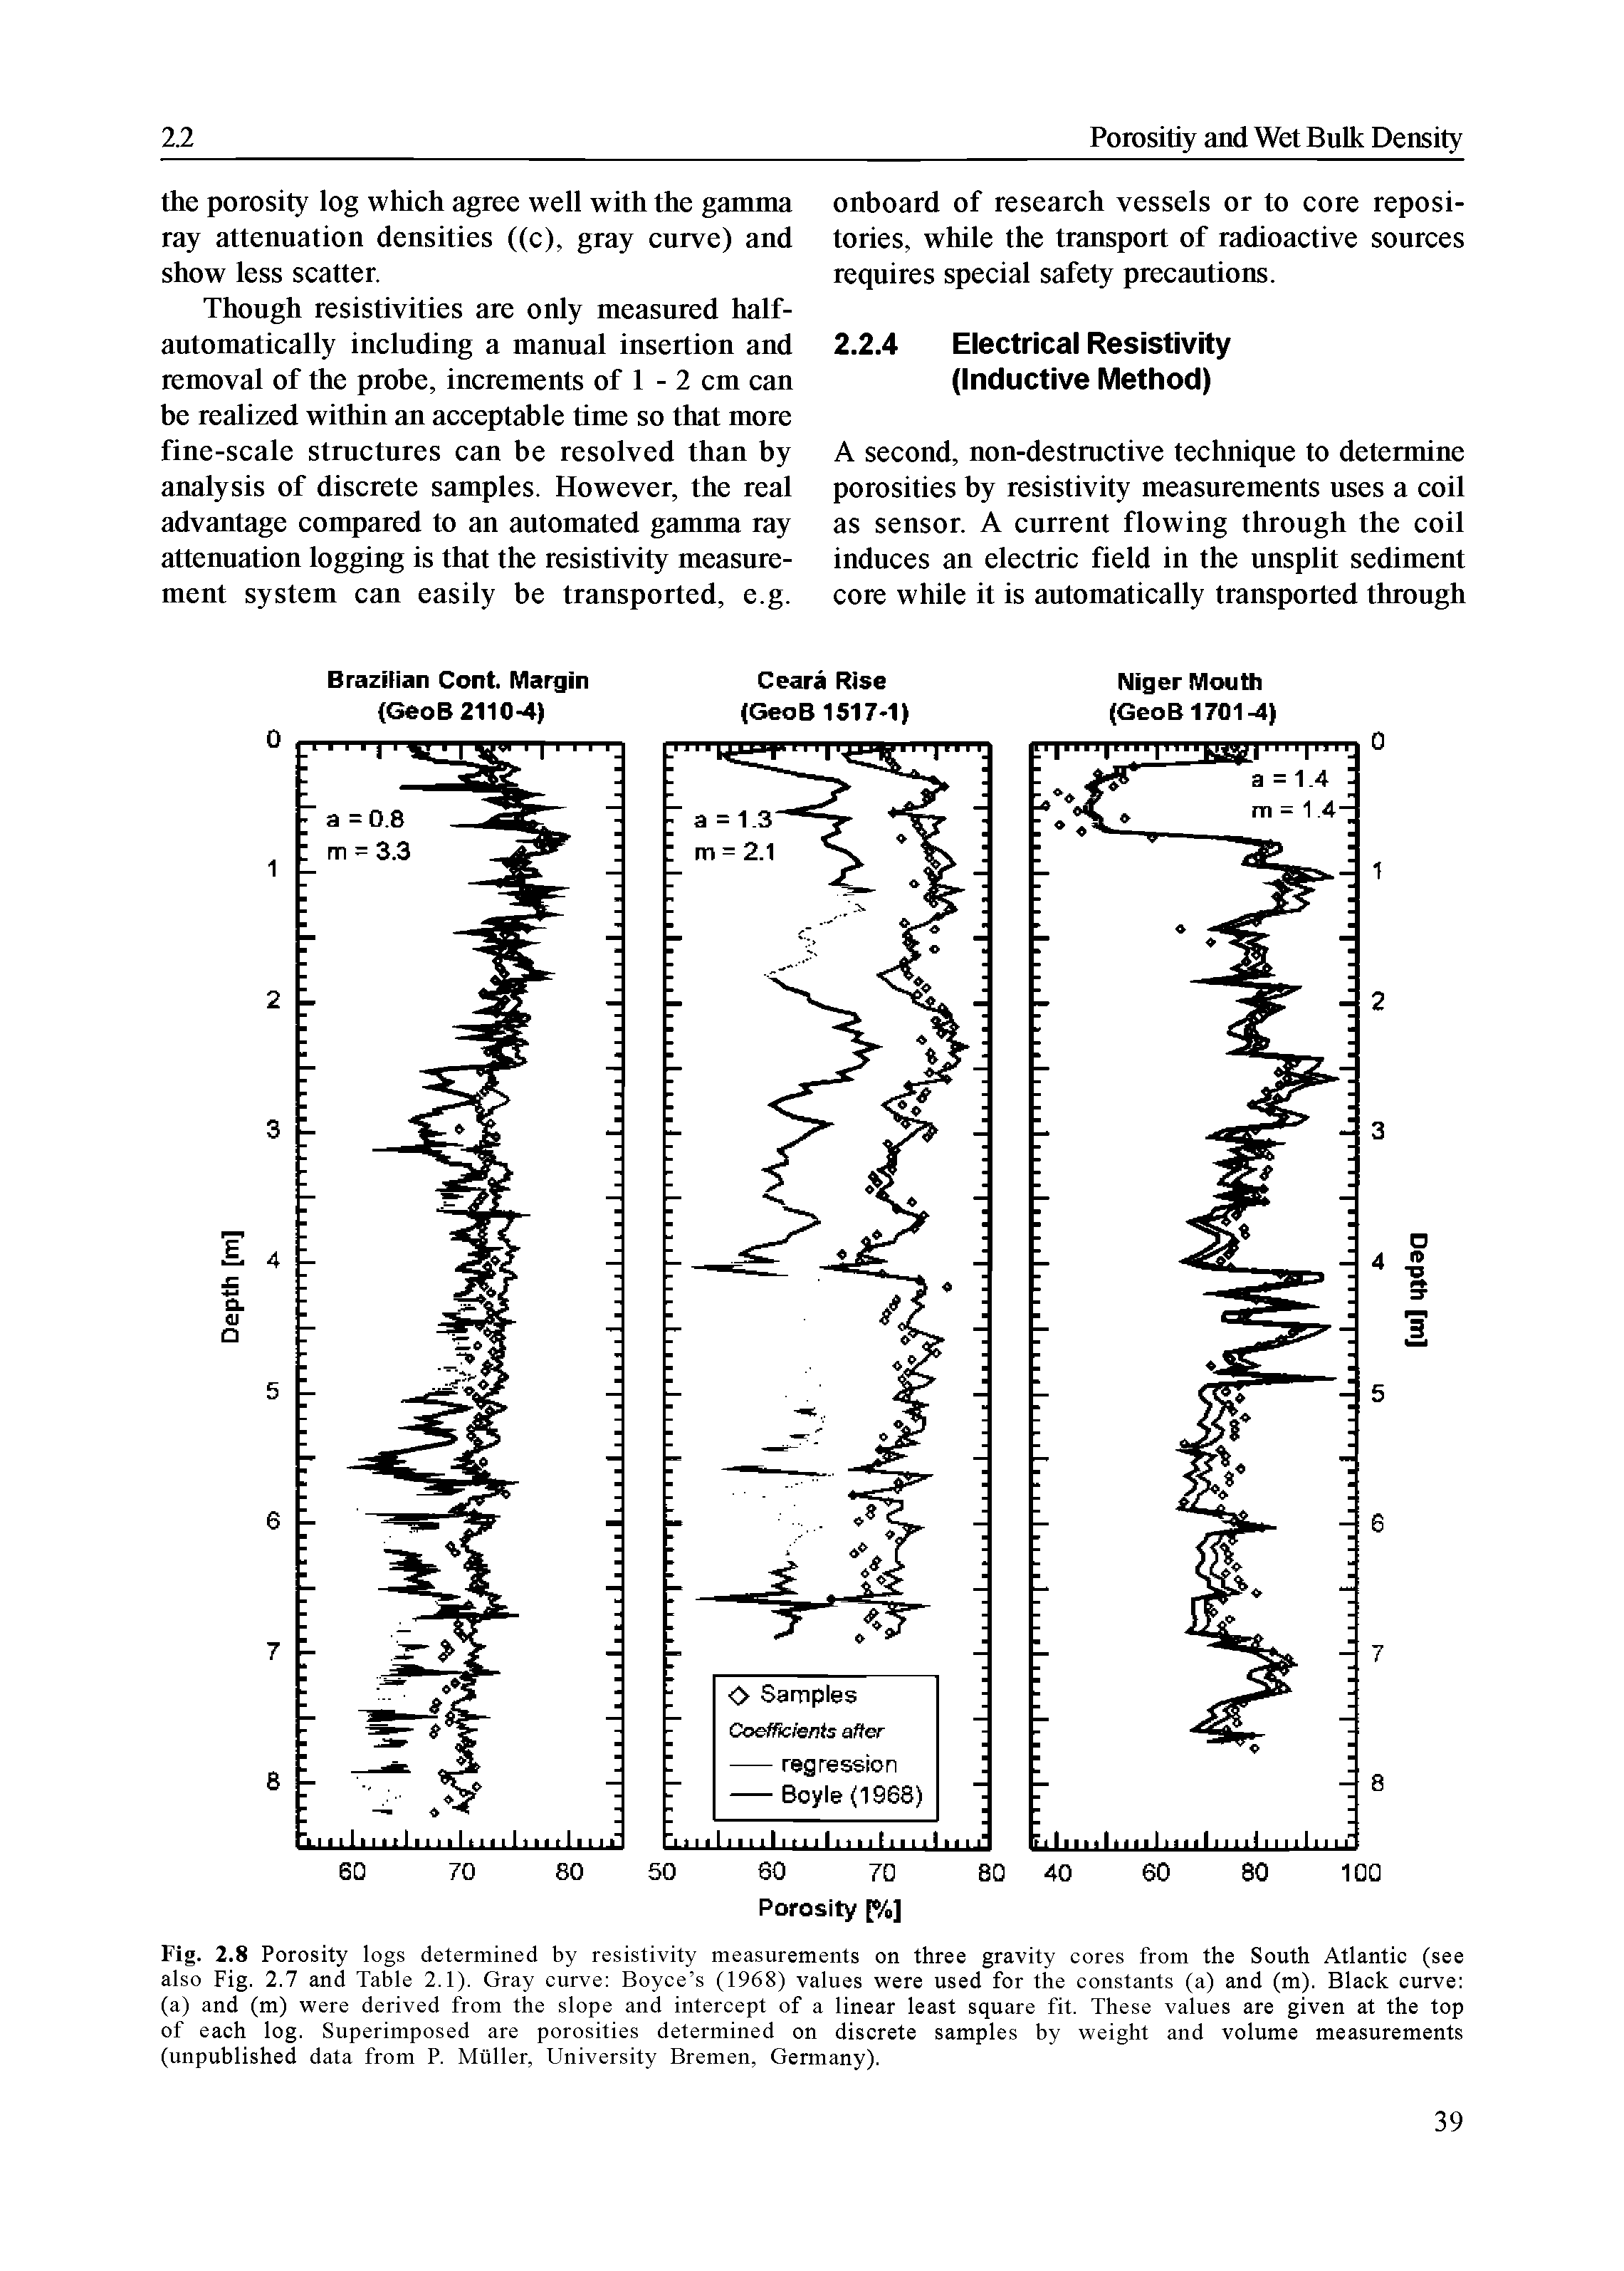 Fig. 2.8 Porosity logs determined by resistivity measurements on three gravity cores from the South Atlantic (see also Fig. 2.7 and Table 2.1). Gray curve Boyce s (1968) values were used for the constants (a) and (m). Black curve (a) and (m) were derived from the slope and intercept of a linear least square fit. These values are given at the top of each log. Superimposed are porosities determined on discrete samples by weight and volume measurements (unpublished data from P. Muller, University Bremen, Germany).